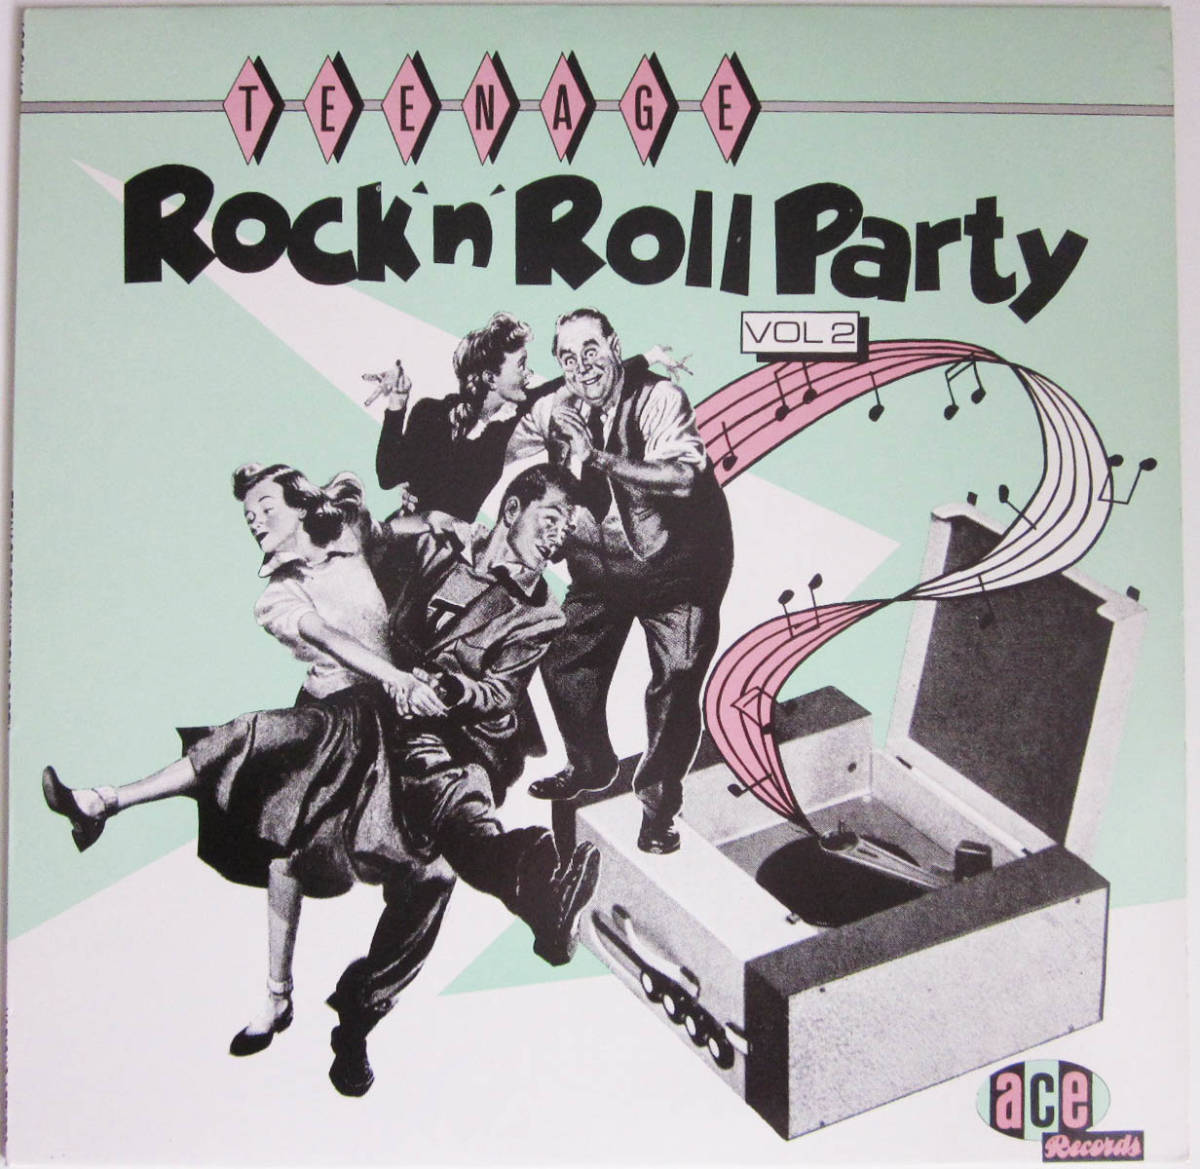  almost as good as new * records out of production LP * Ace Records V.A TEENAGE ROCK 'N' ROLL PARTY 2 * 50's super popular american lock n roll rockabilly R&B